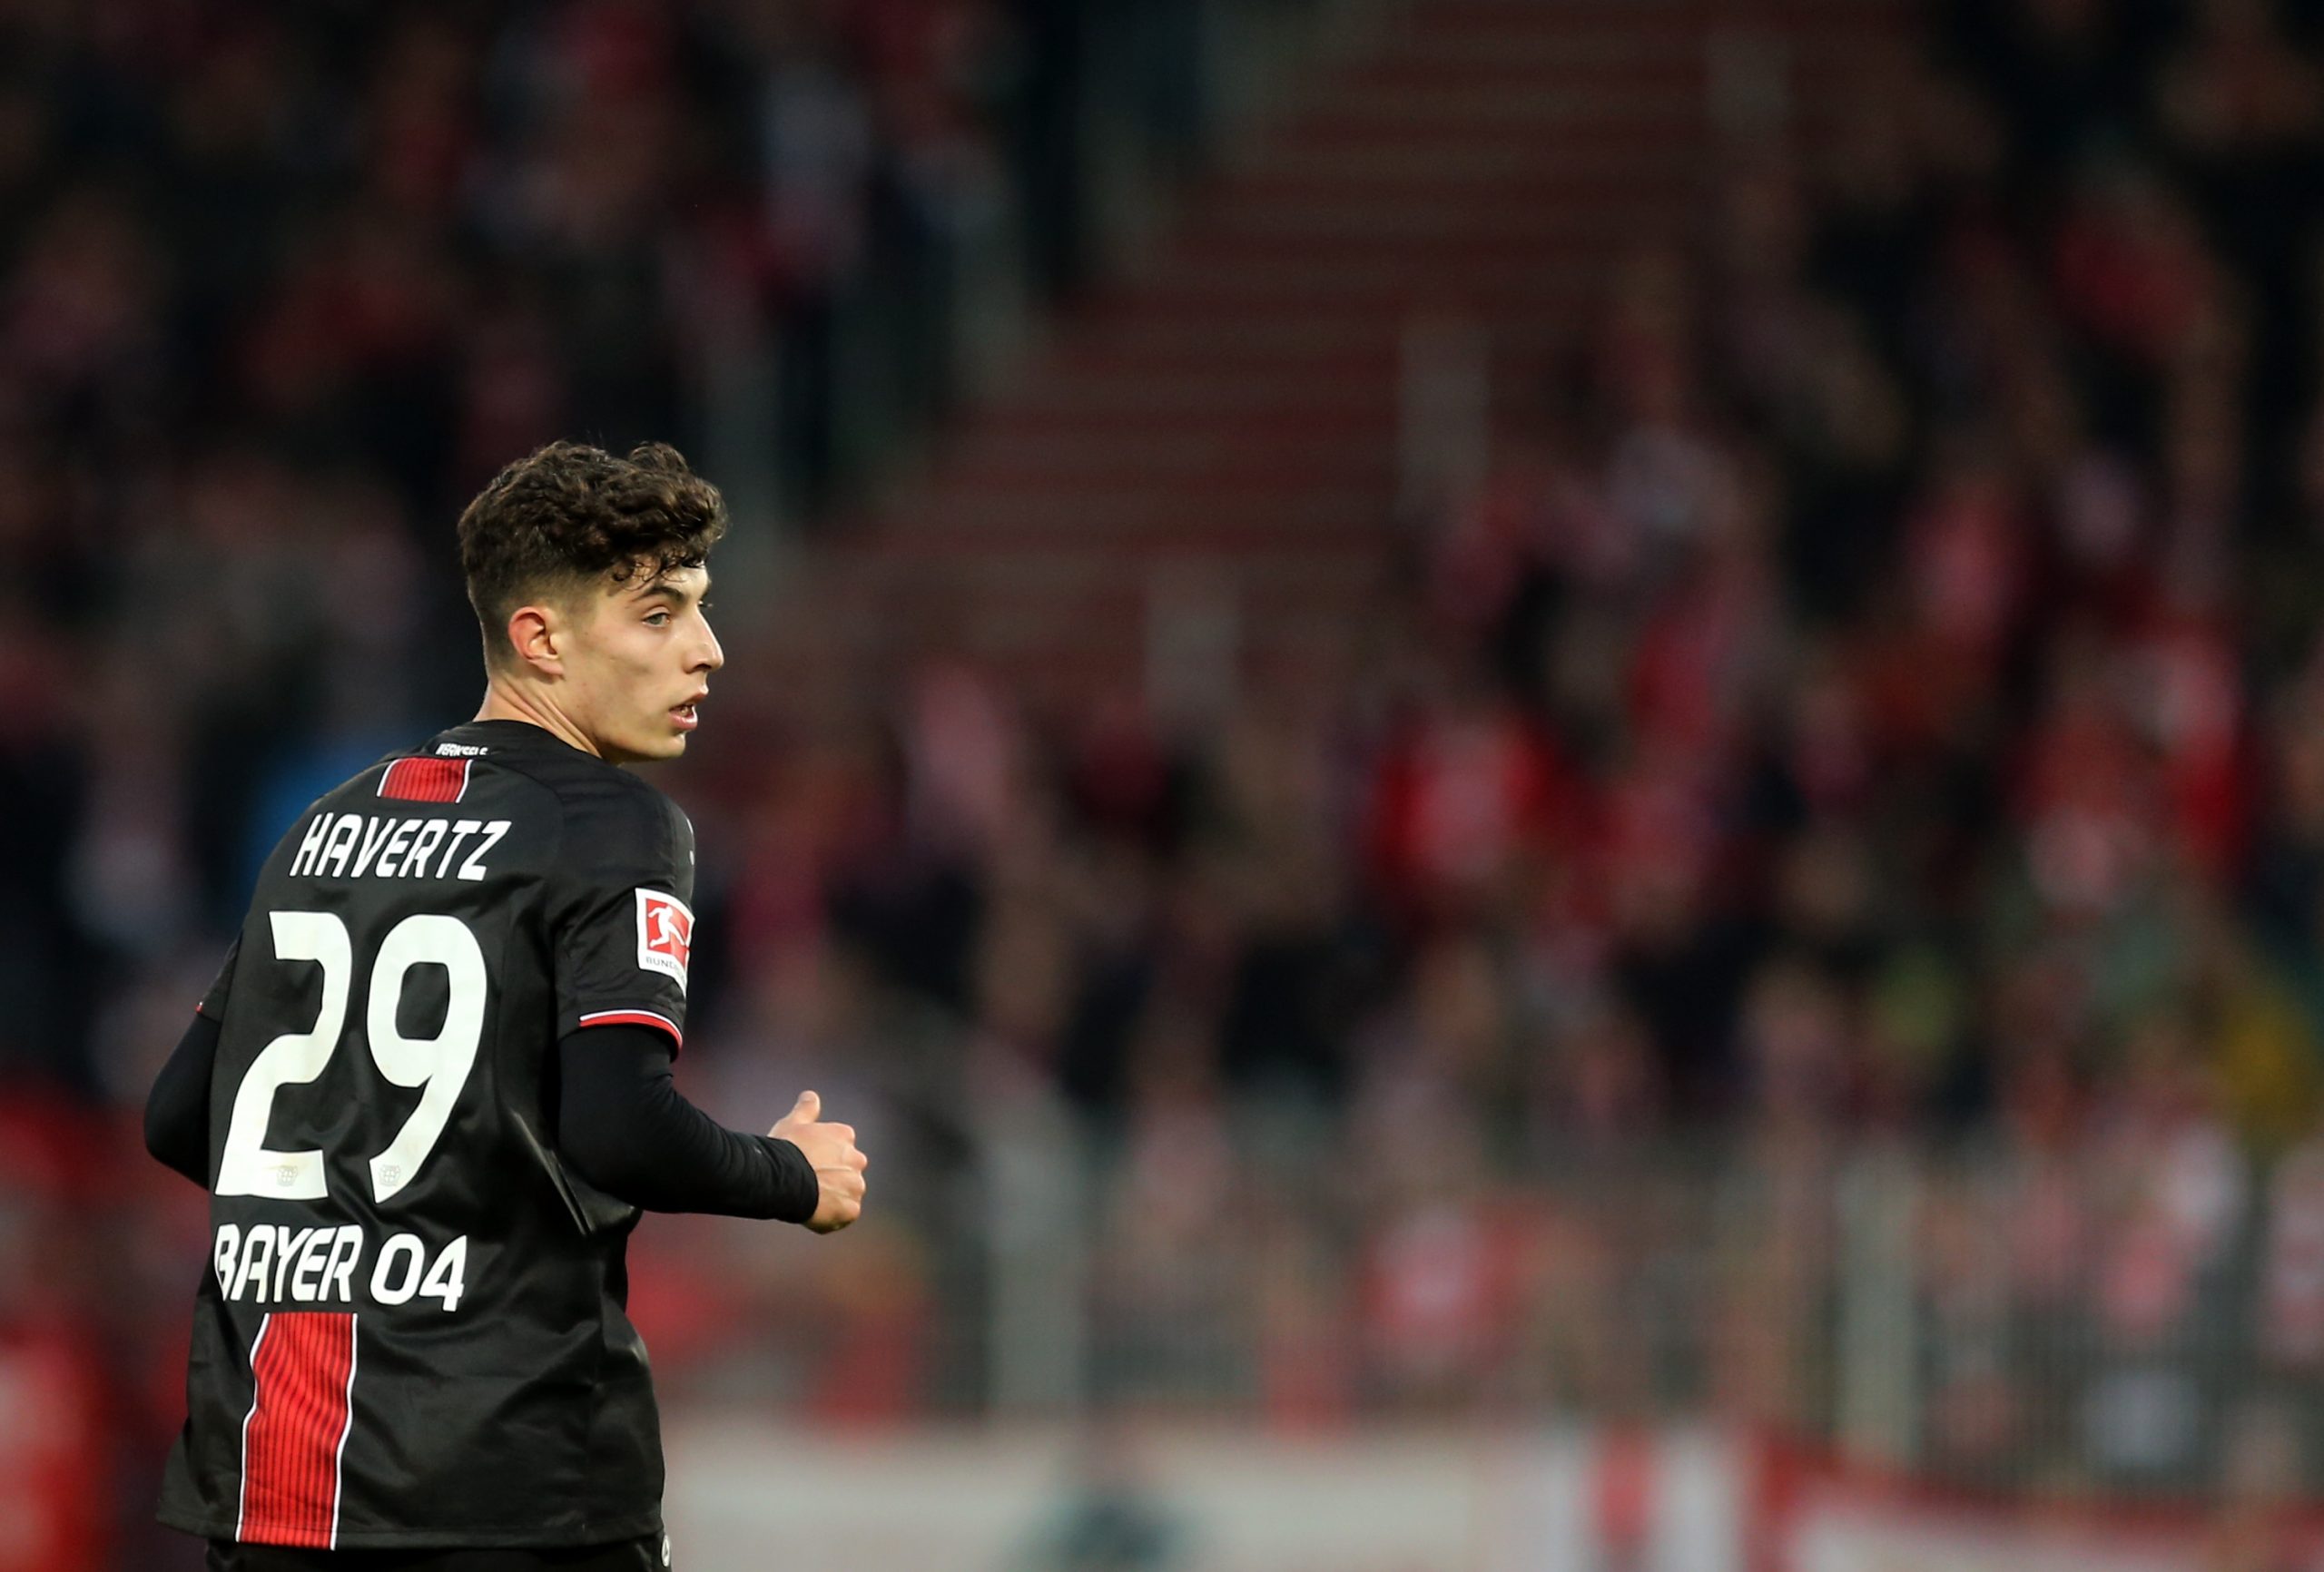 Havertz and Not Sancho May Be Manchester United’s Transfer Ticket